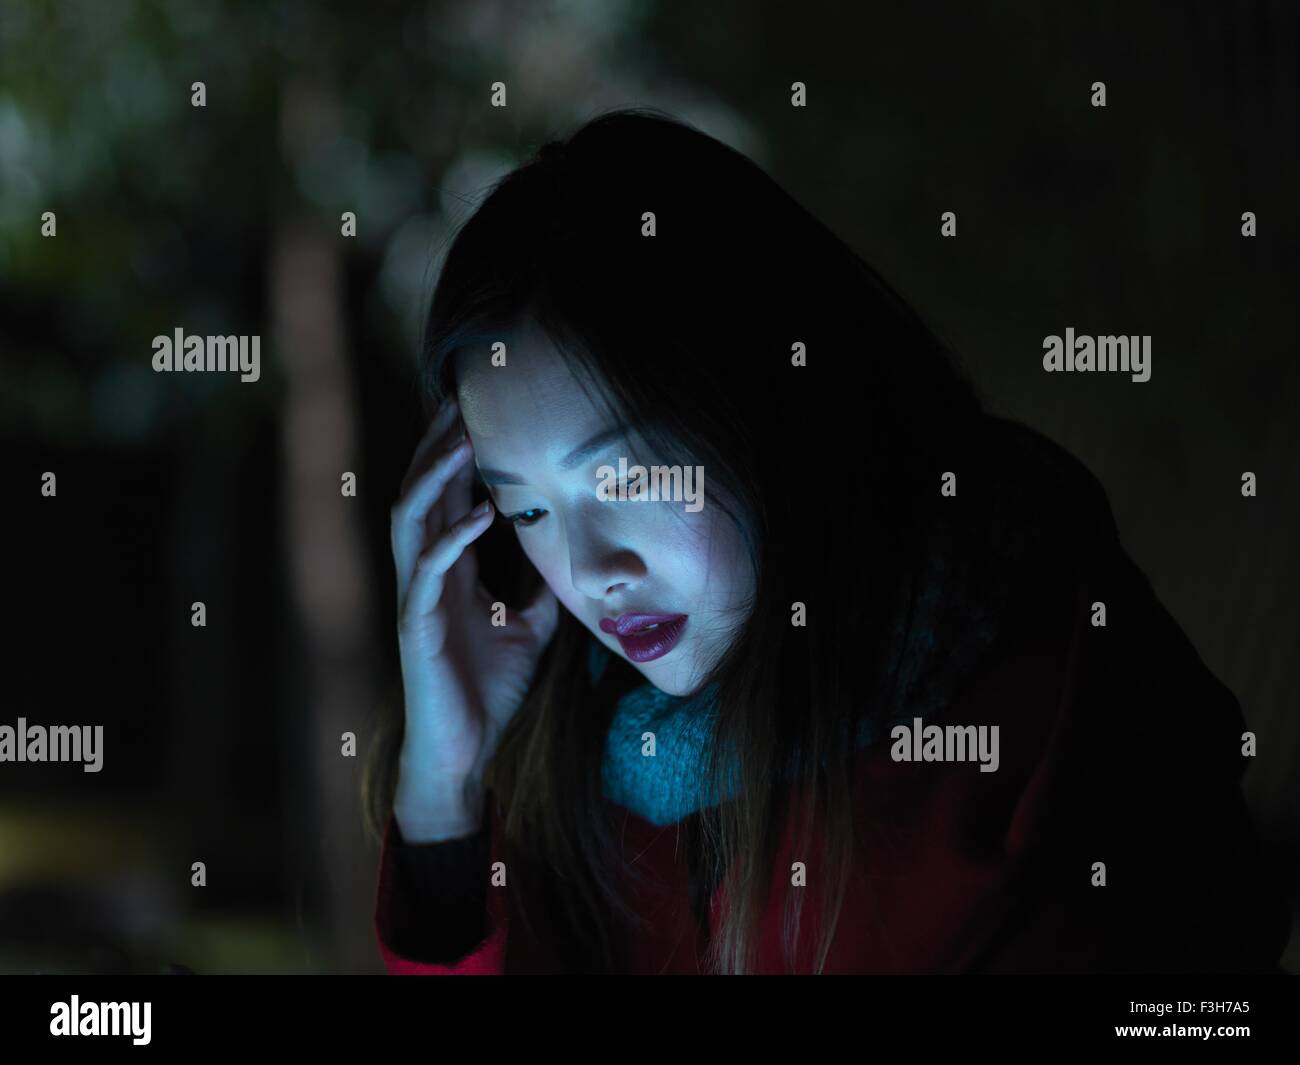 Young woman outdoors at night, using mobile phone, face illuminated Stock Photo